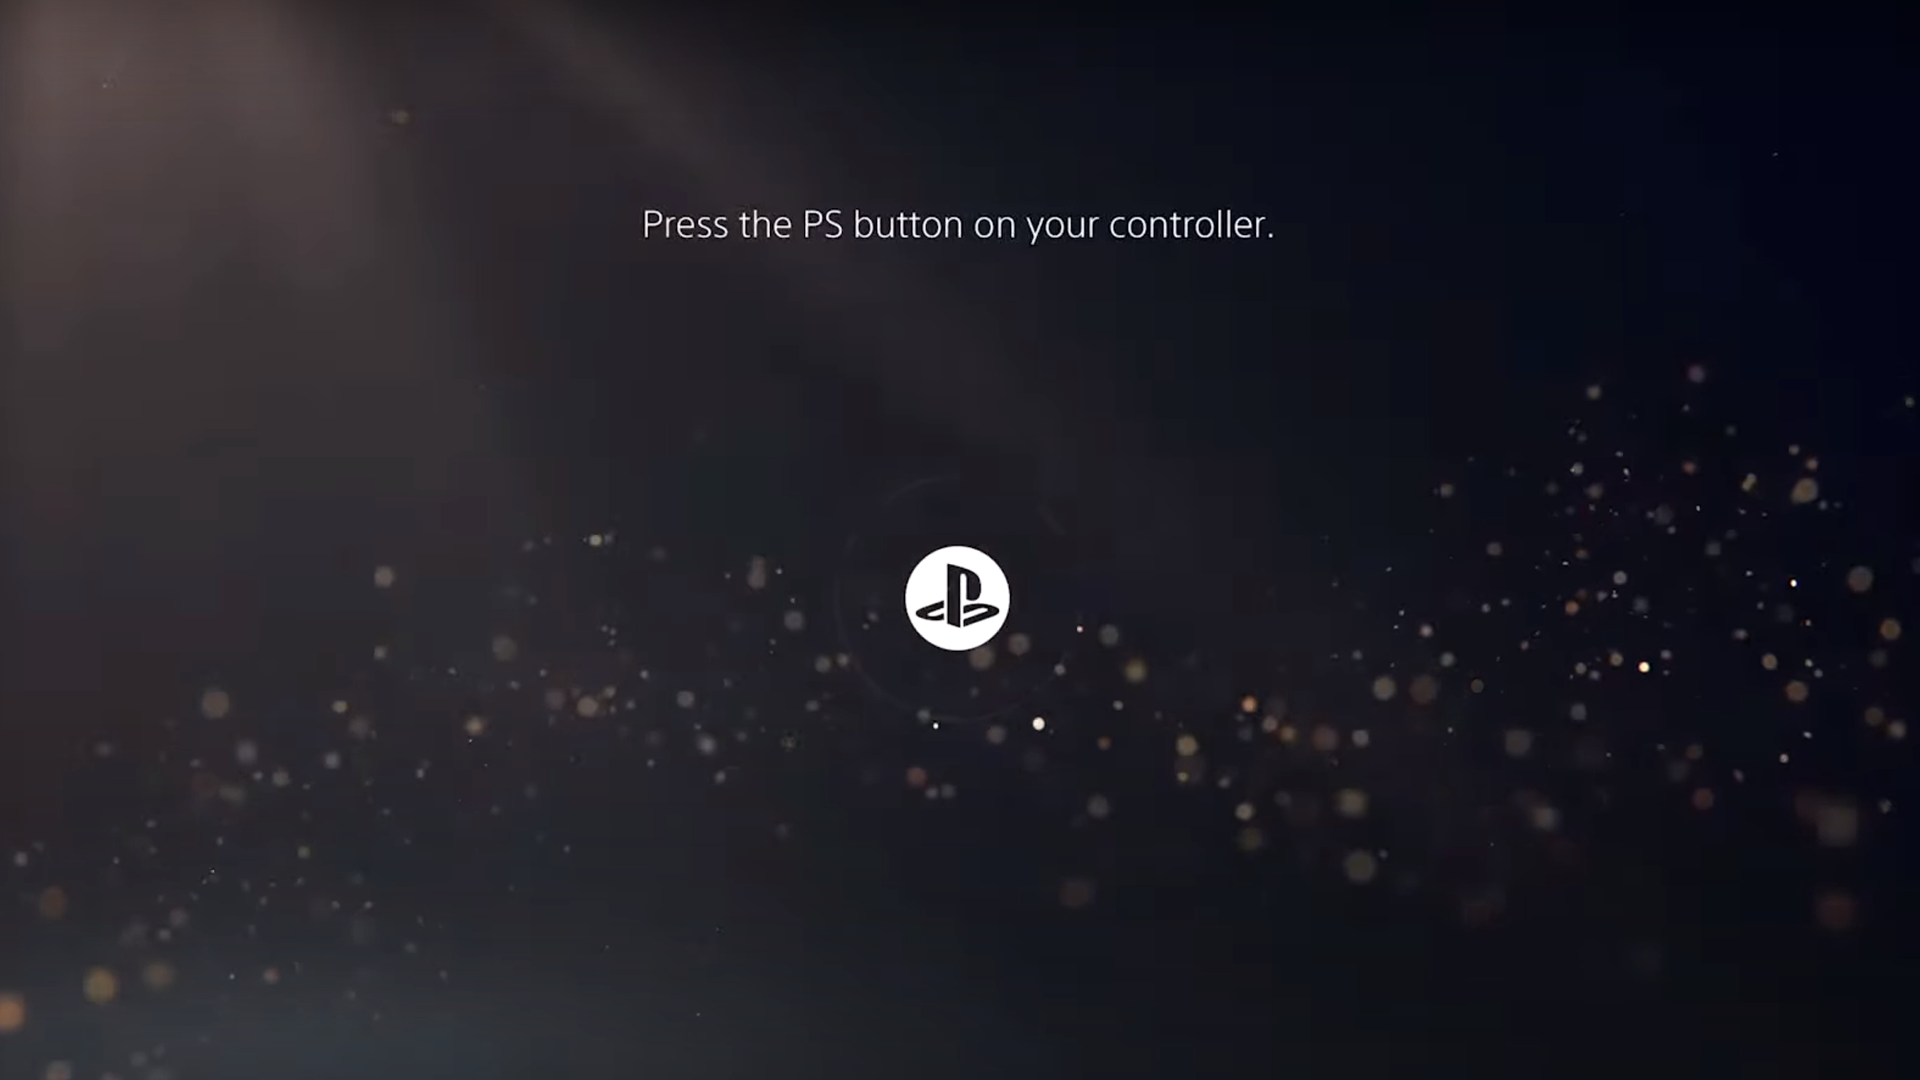 Rumor: Dev Leaks Details About PS5 UI, Themes, Activision Partnership